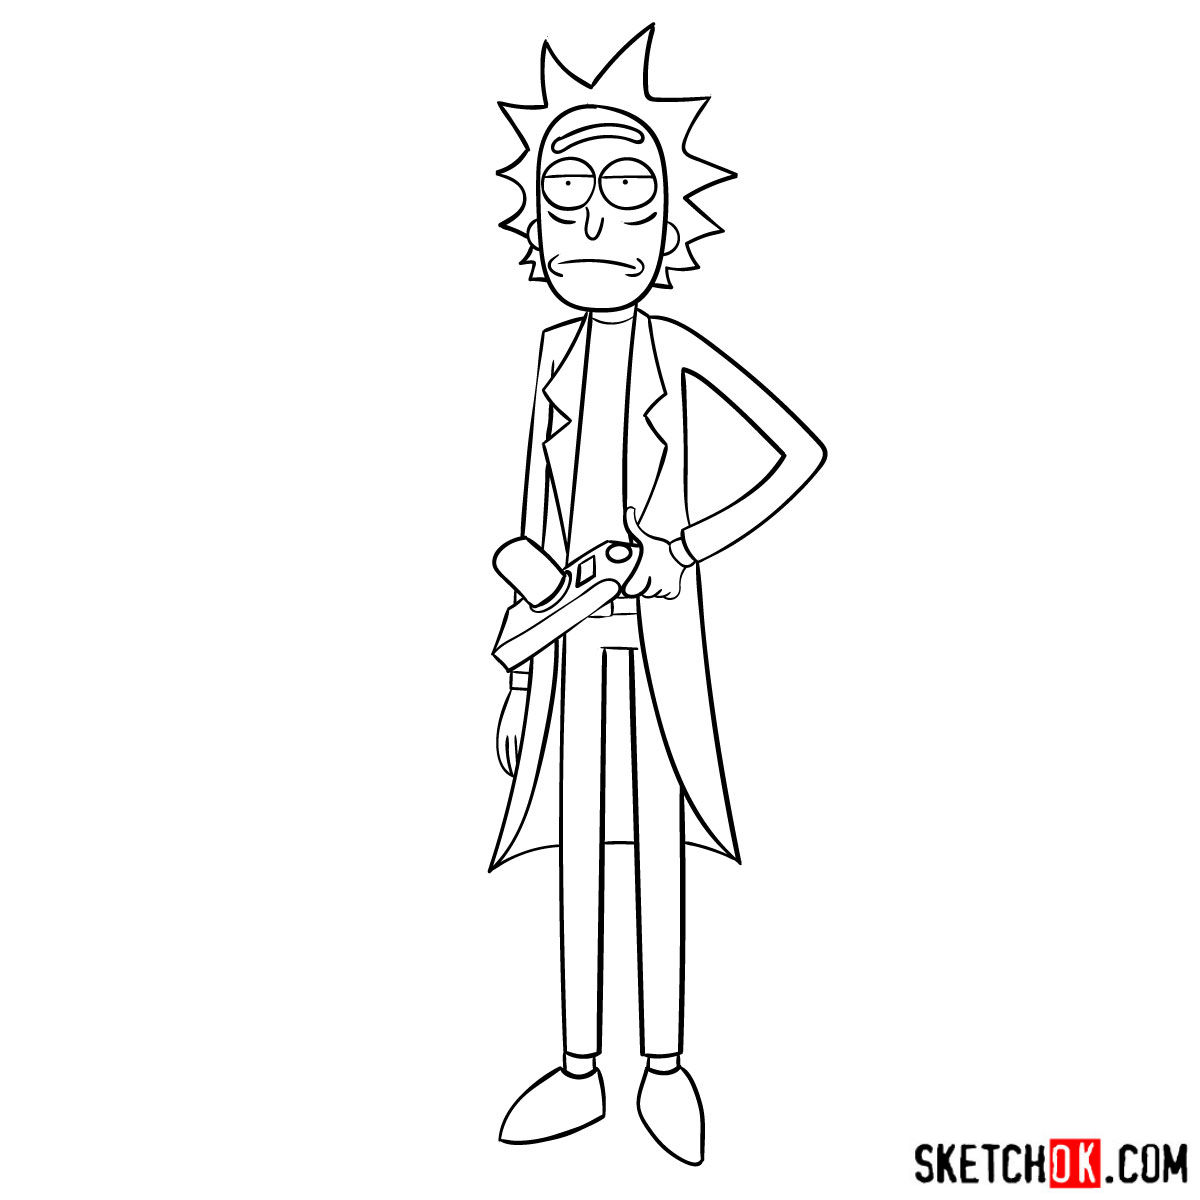 How to draw Rick Sanchez (Rick and Morty) - step 13